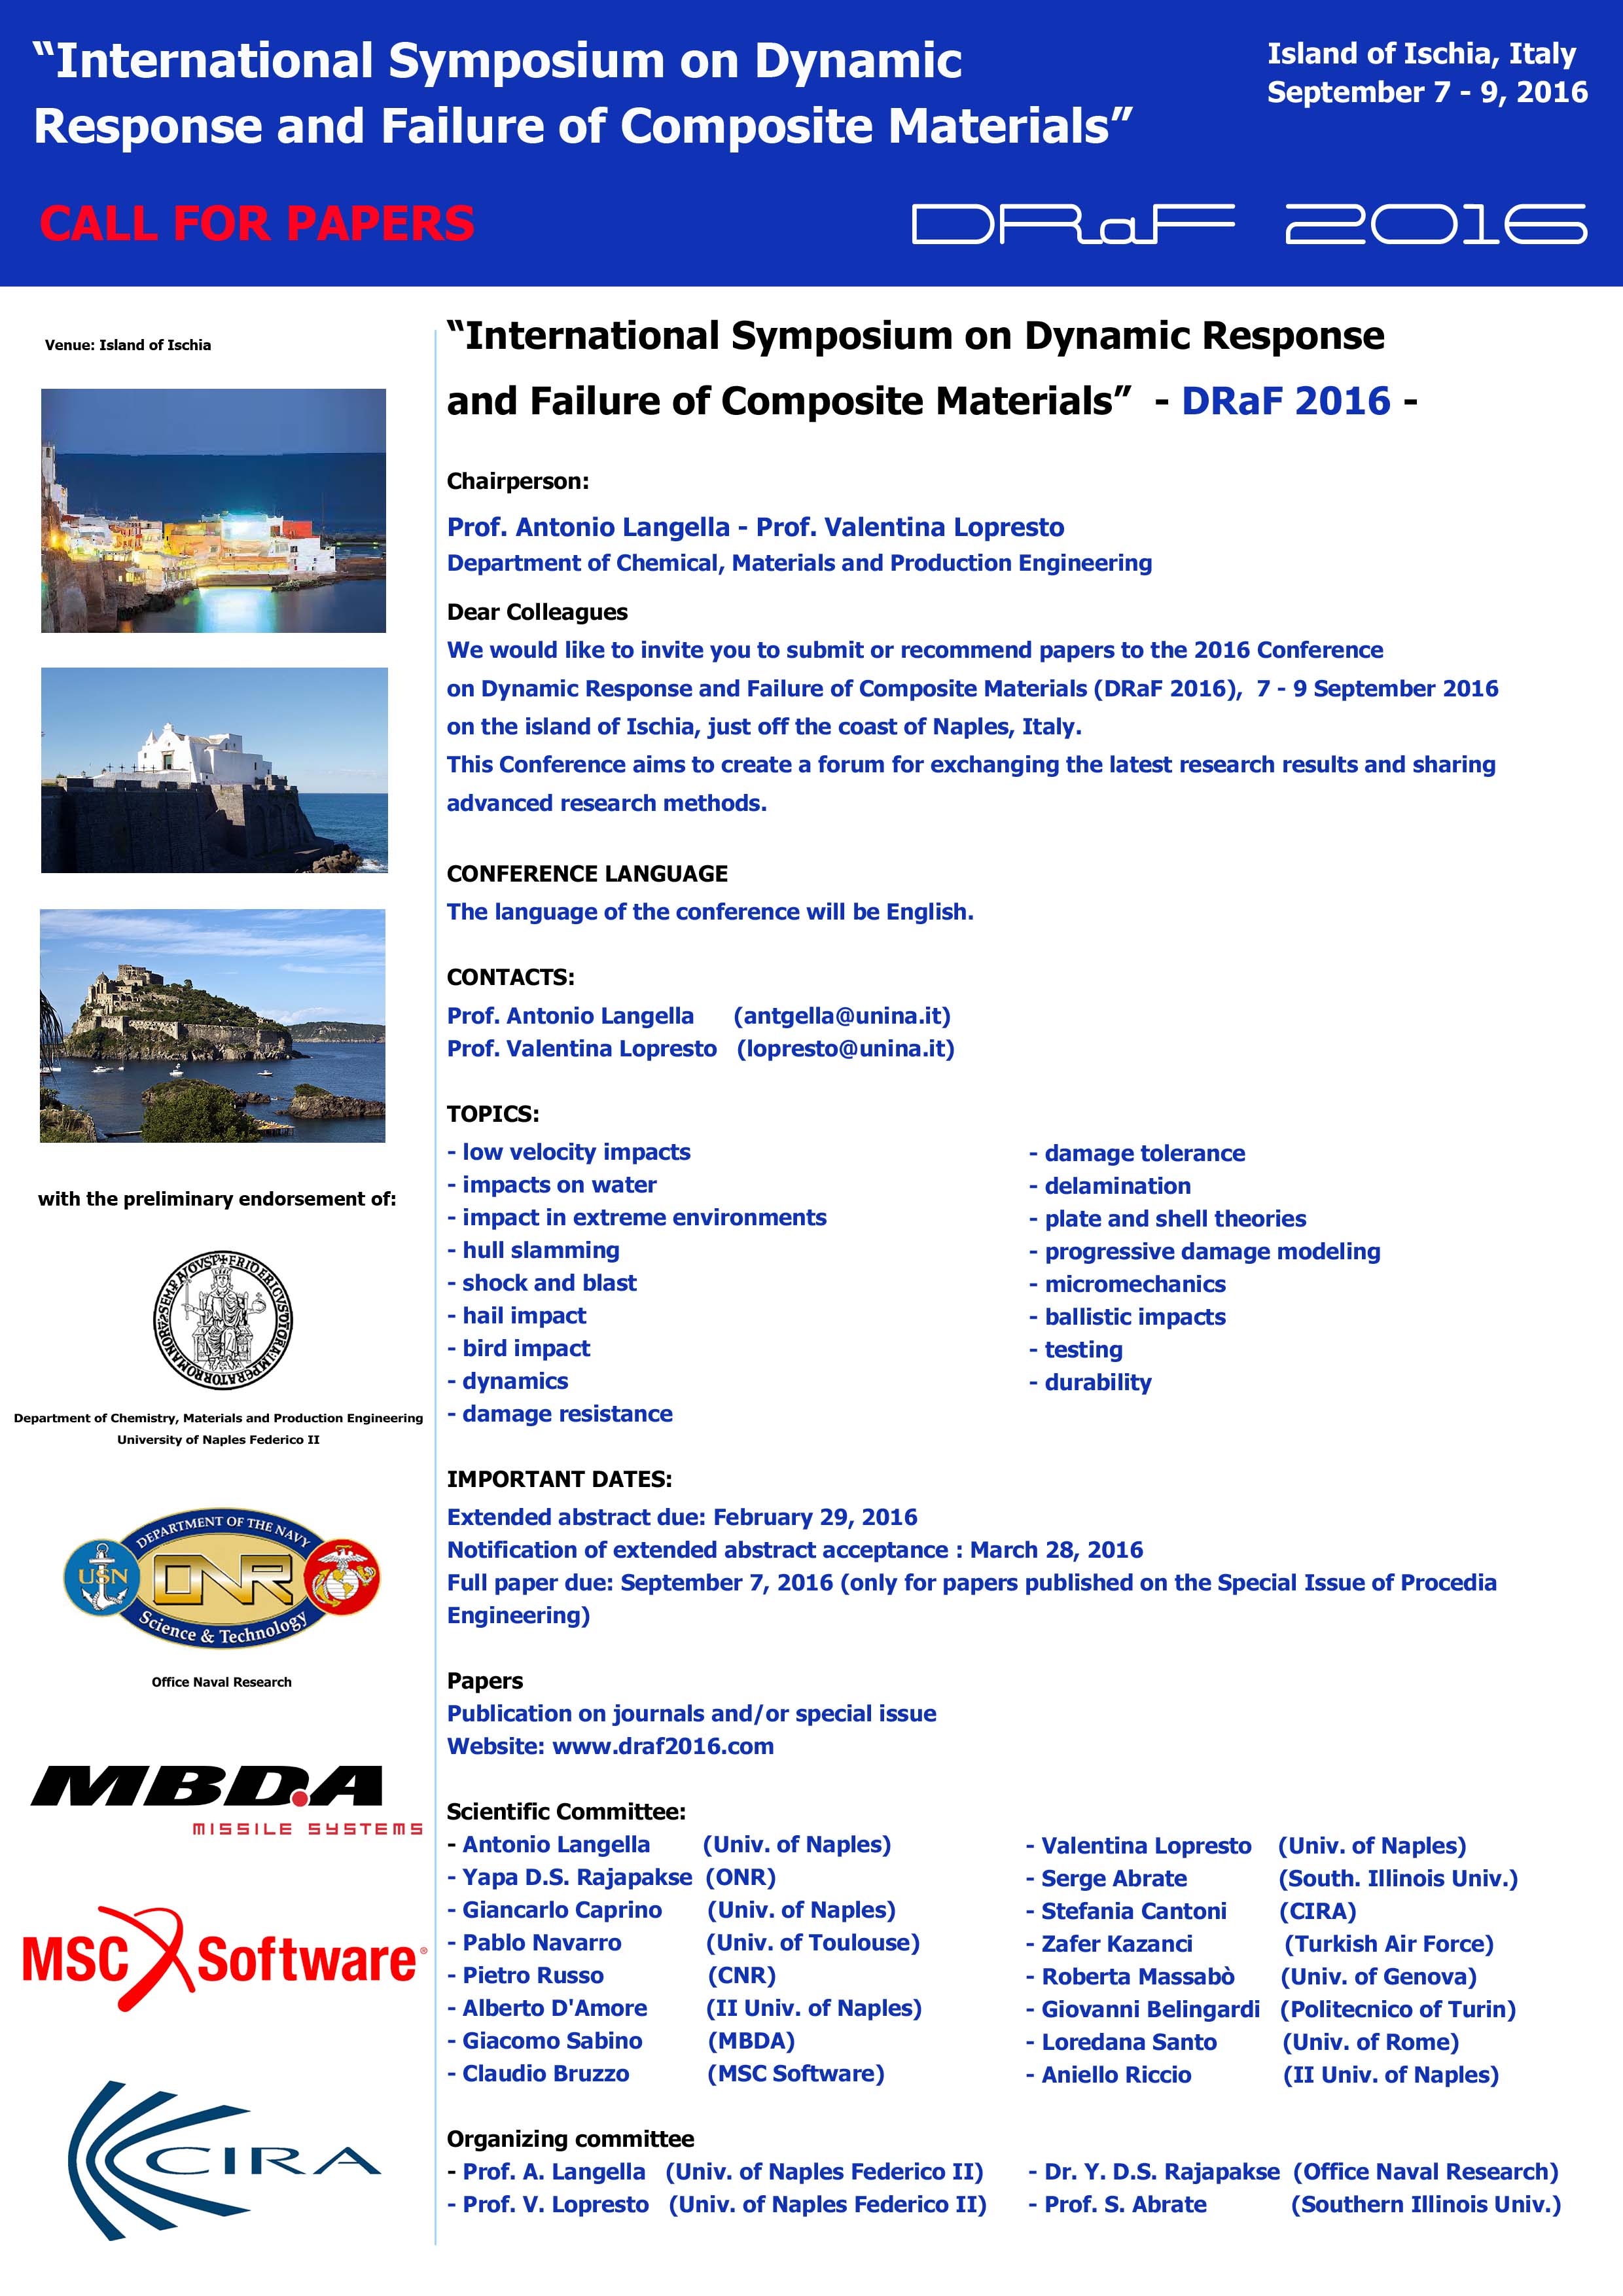 Symposium on Dynamic Response and Failure of Composite Materials